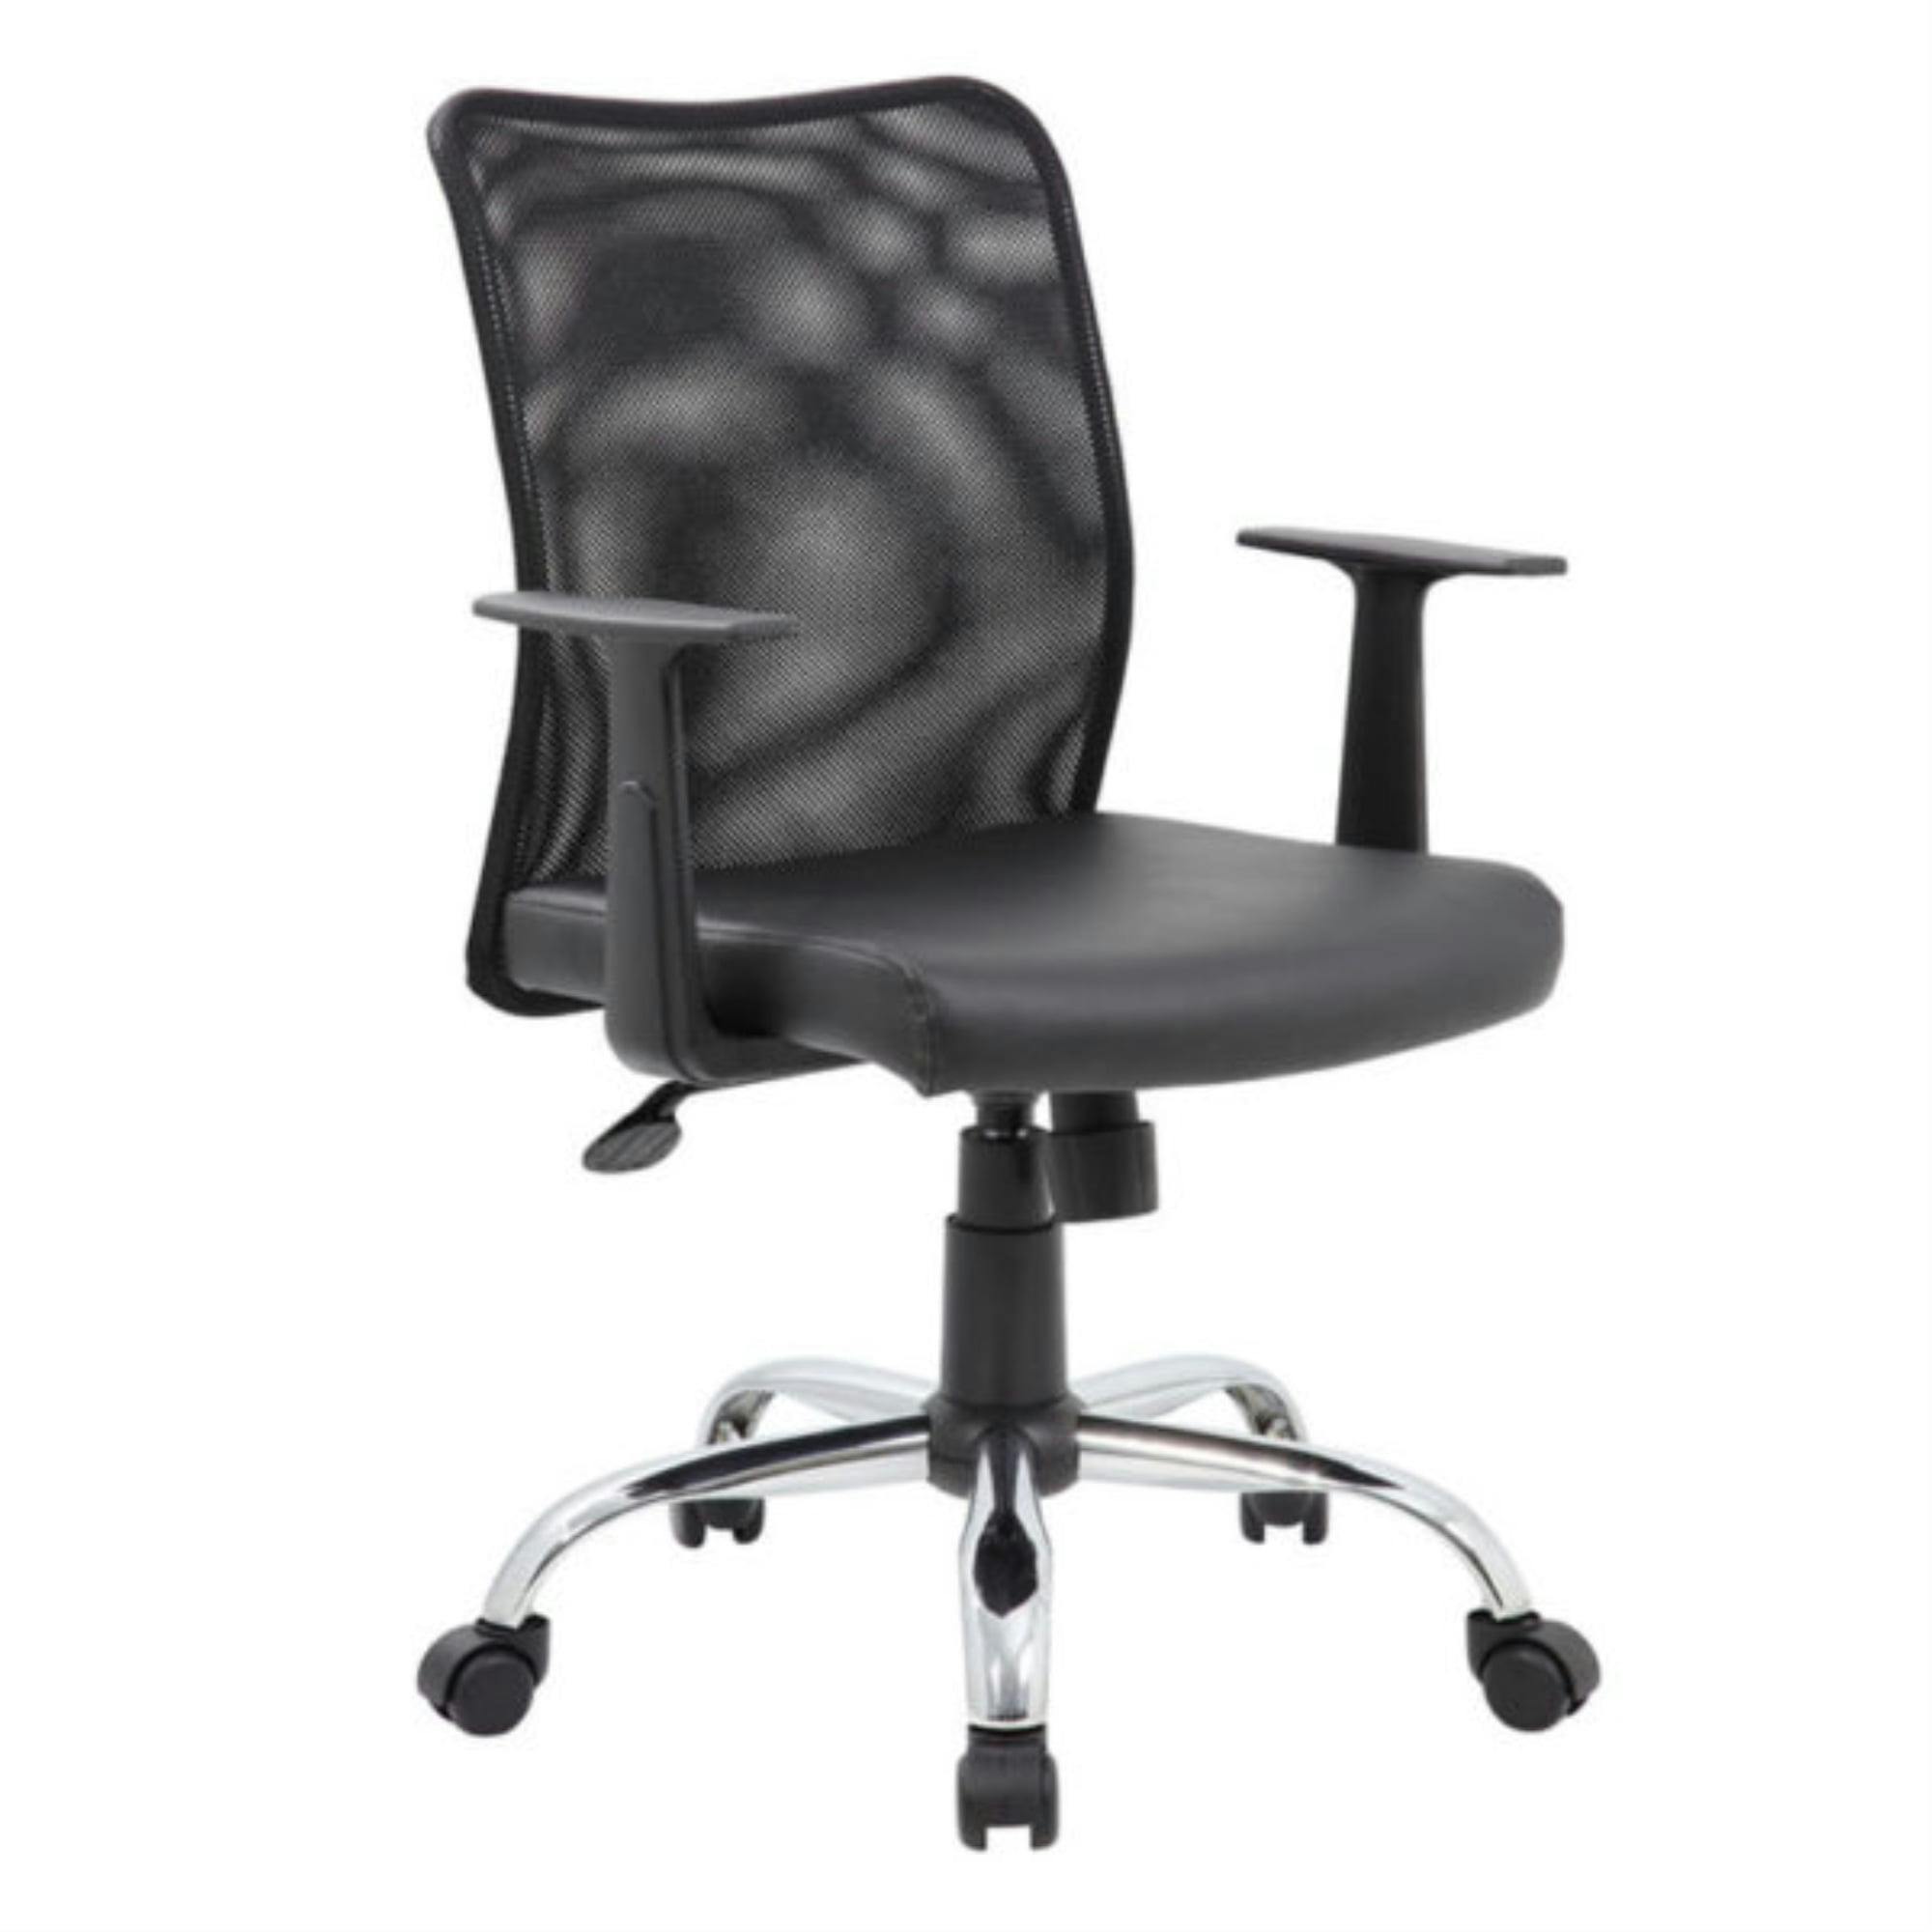 Swivel Mesh Back Task Chair with Vinyl Seat and Chrome Base - Black